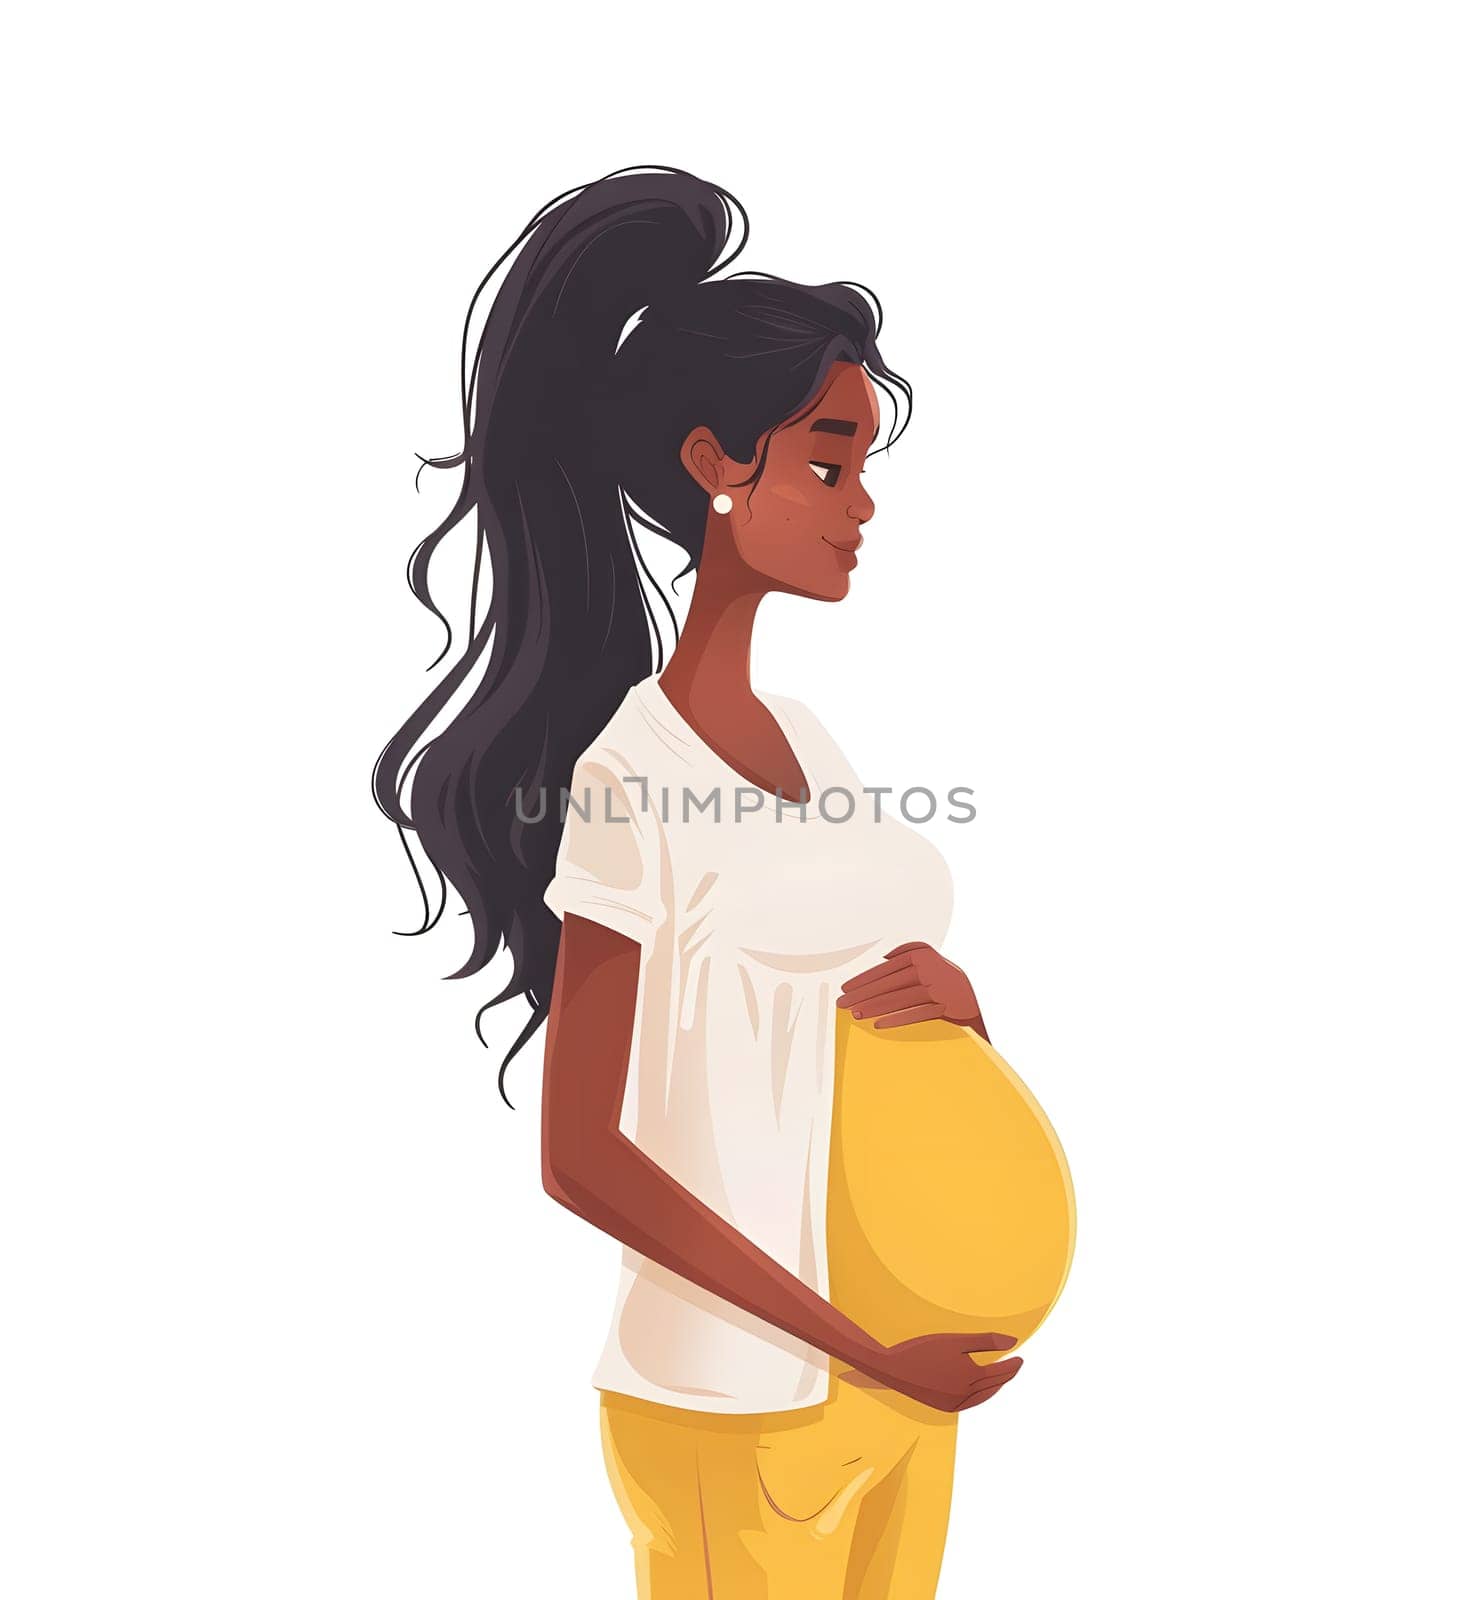 A cartoon illustration of a happy pregnant woman with brown hair holding her belly. Her waist, thigh, and sleeve gesture are showcased in this fashion design art piece